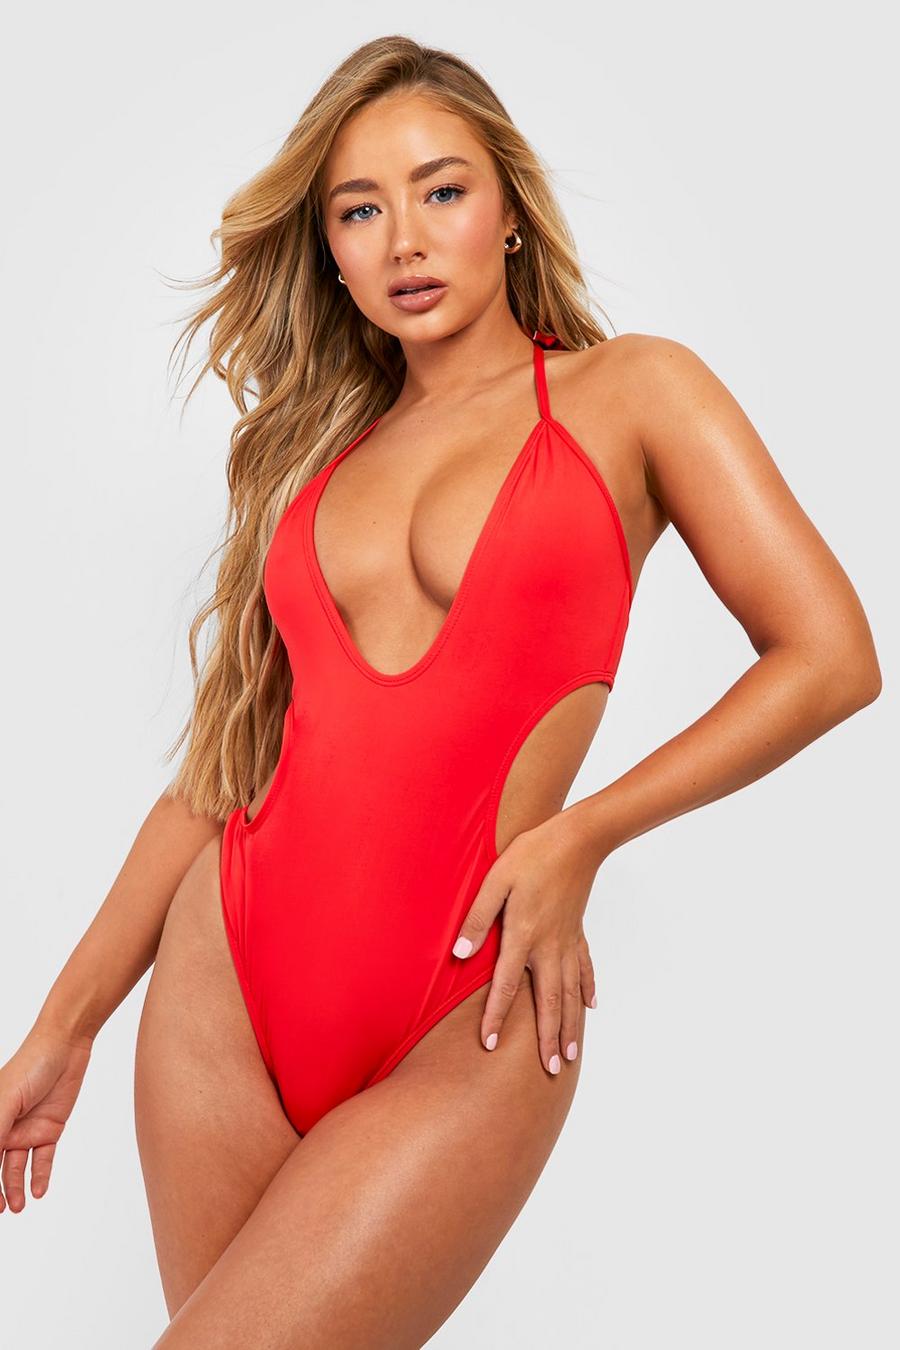 https://media.boohoo.com/i/boohoo/szz01257_red_xl/female-red-deep-plunge-cut-out-recycled-swimsuit/?w=900&qlt=default&fmt.jp2.qlt=70&fmt=auto&sm=fit